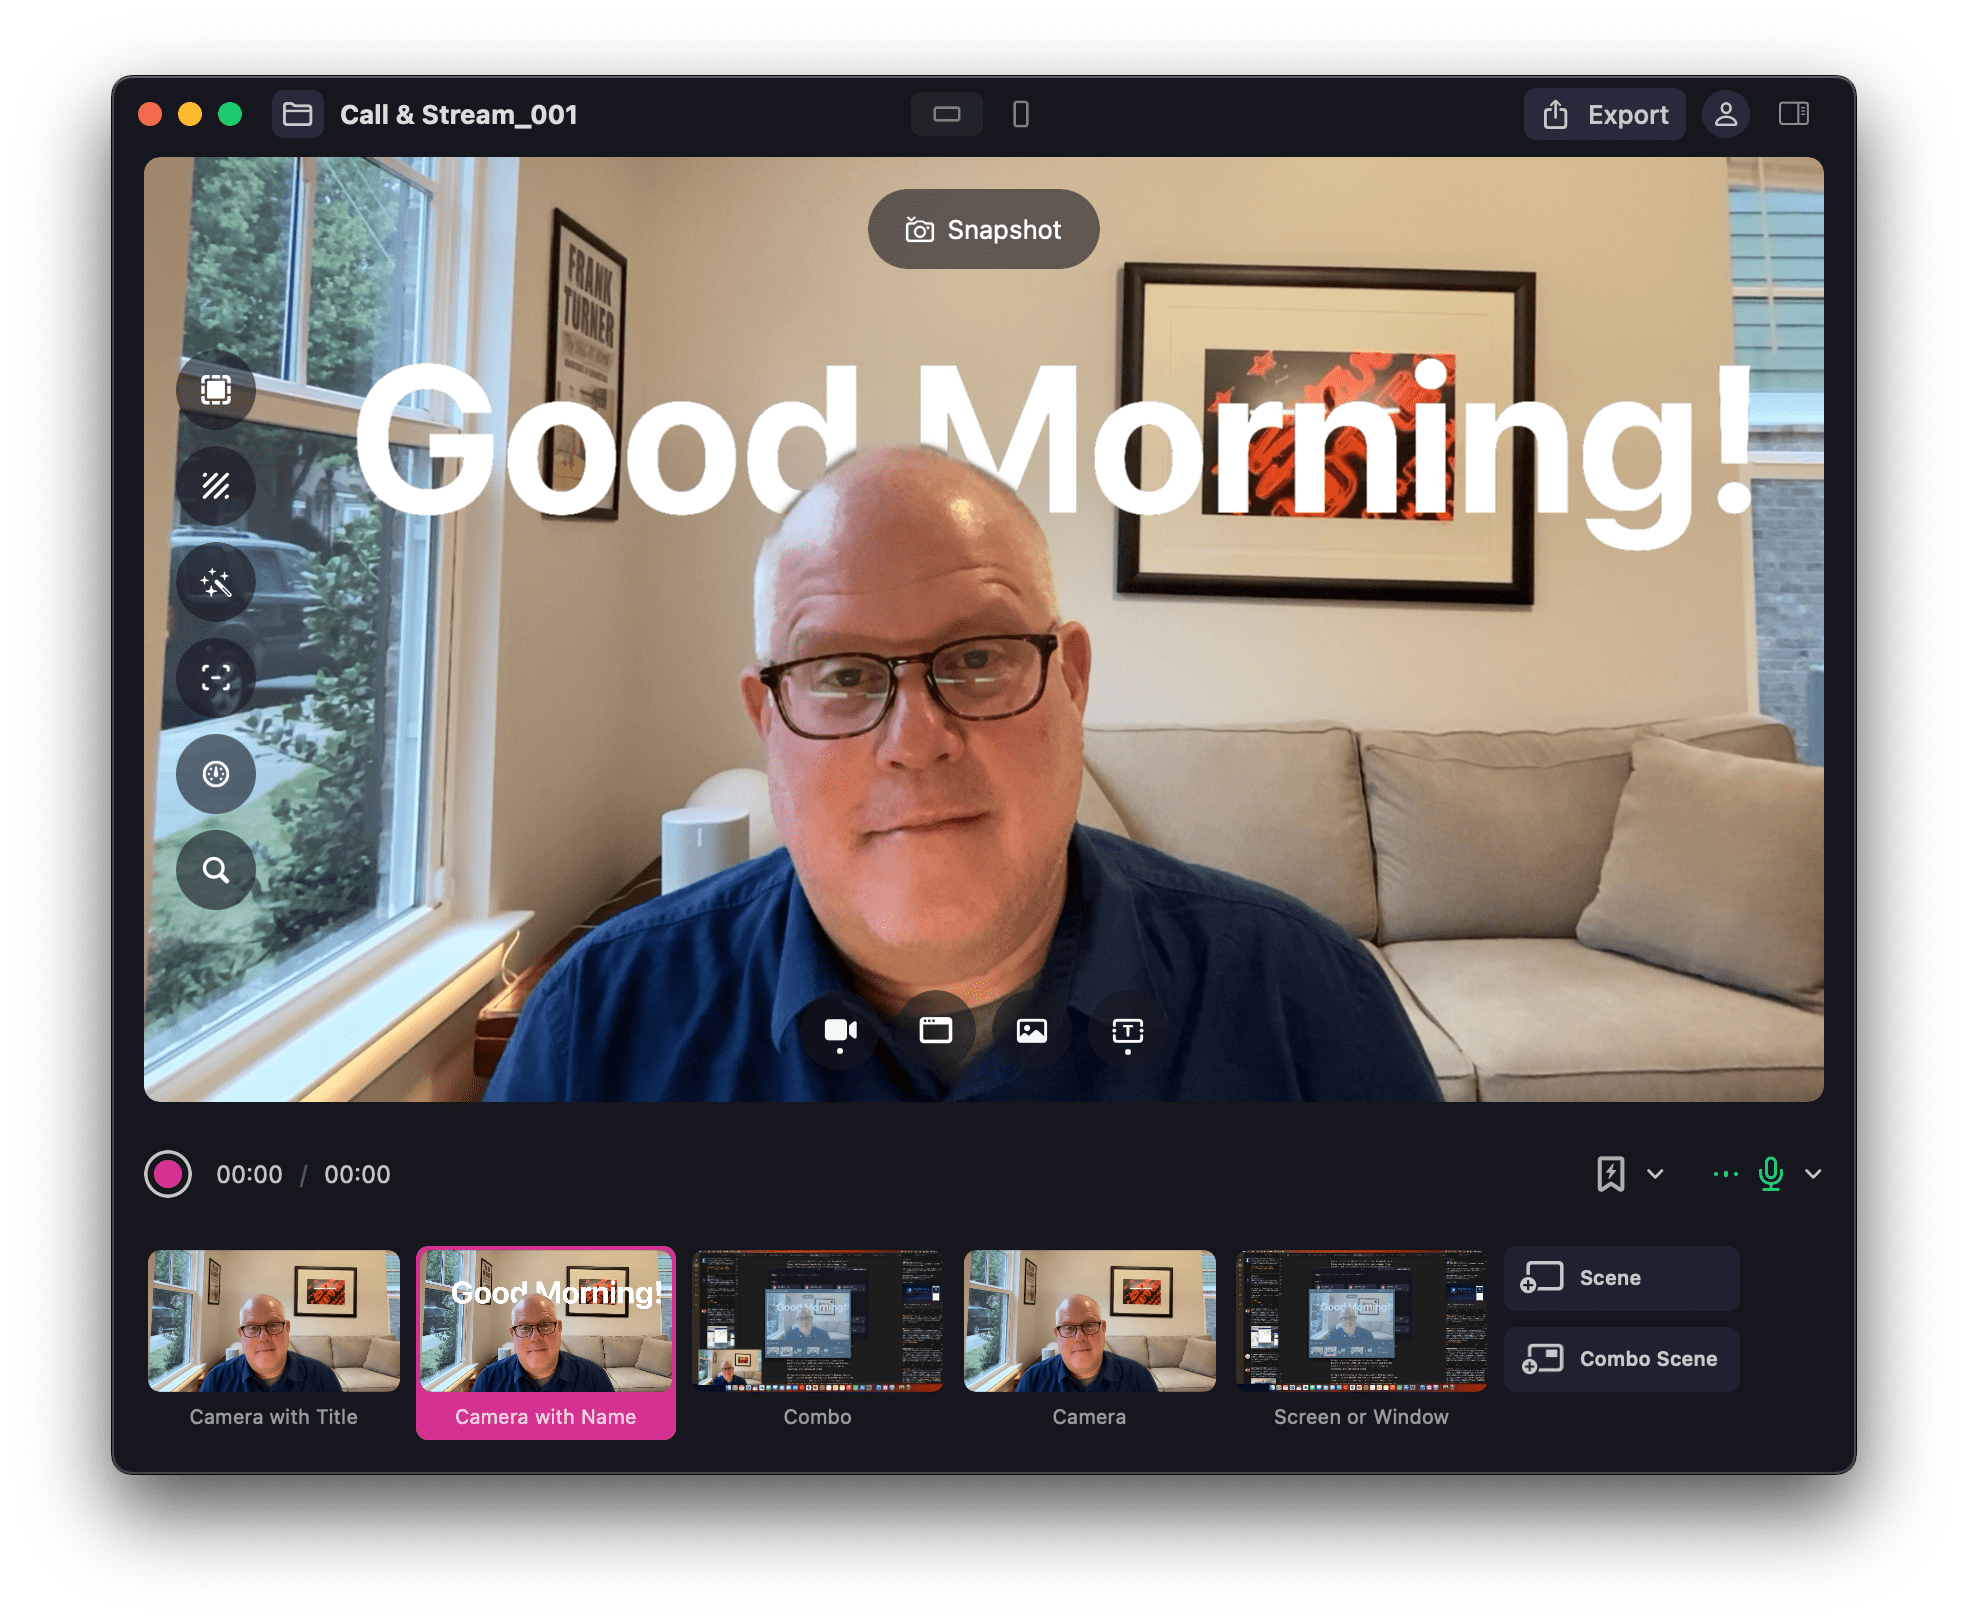 Yes, I'm going to be the guy with the giant 'Good Morning' behind his head for my next video call.